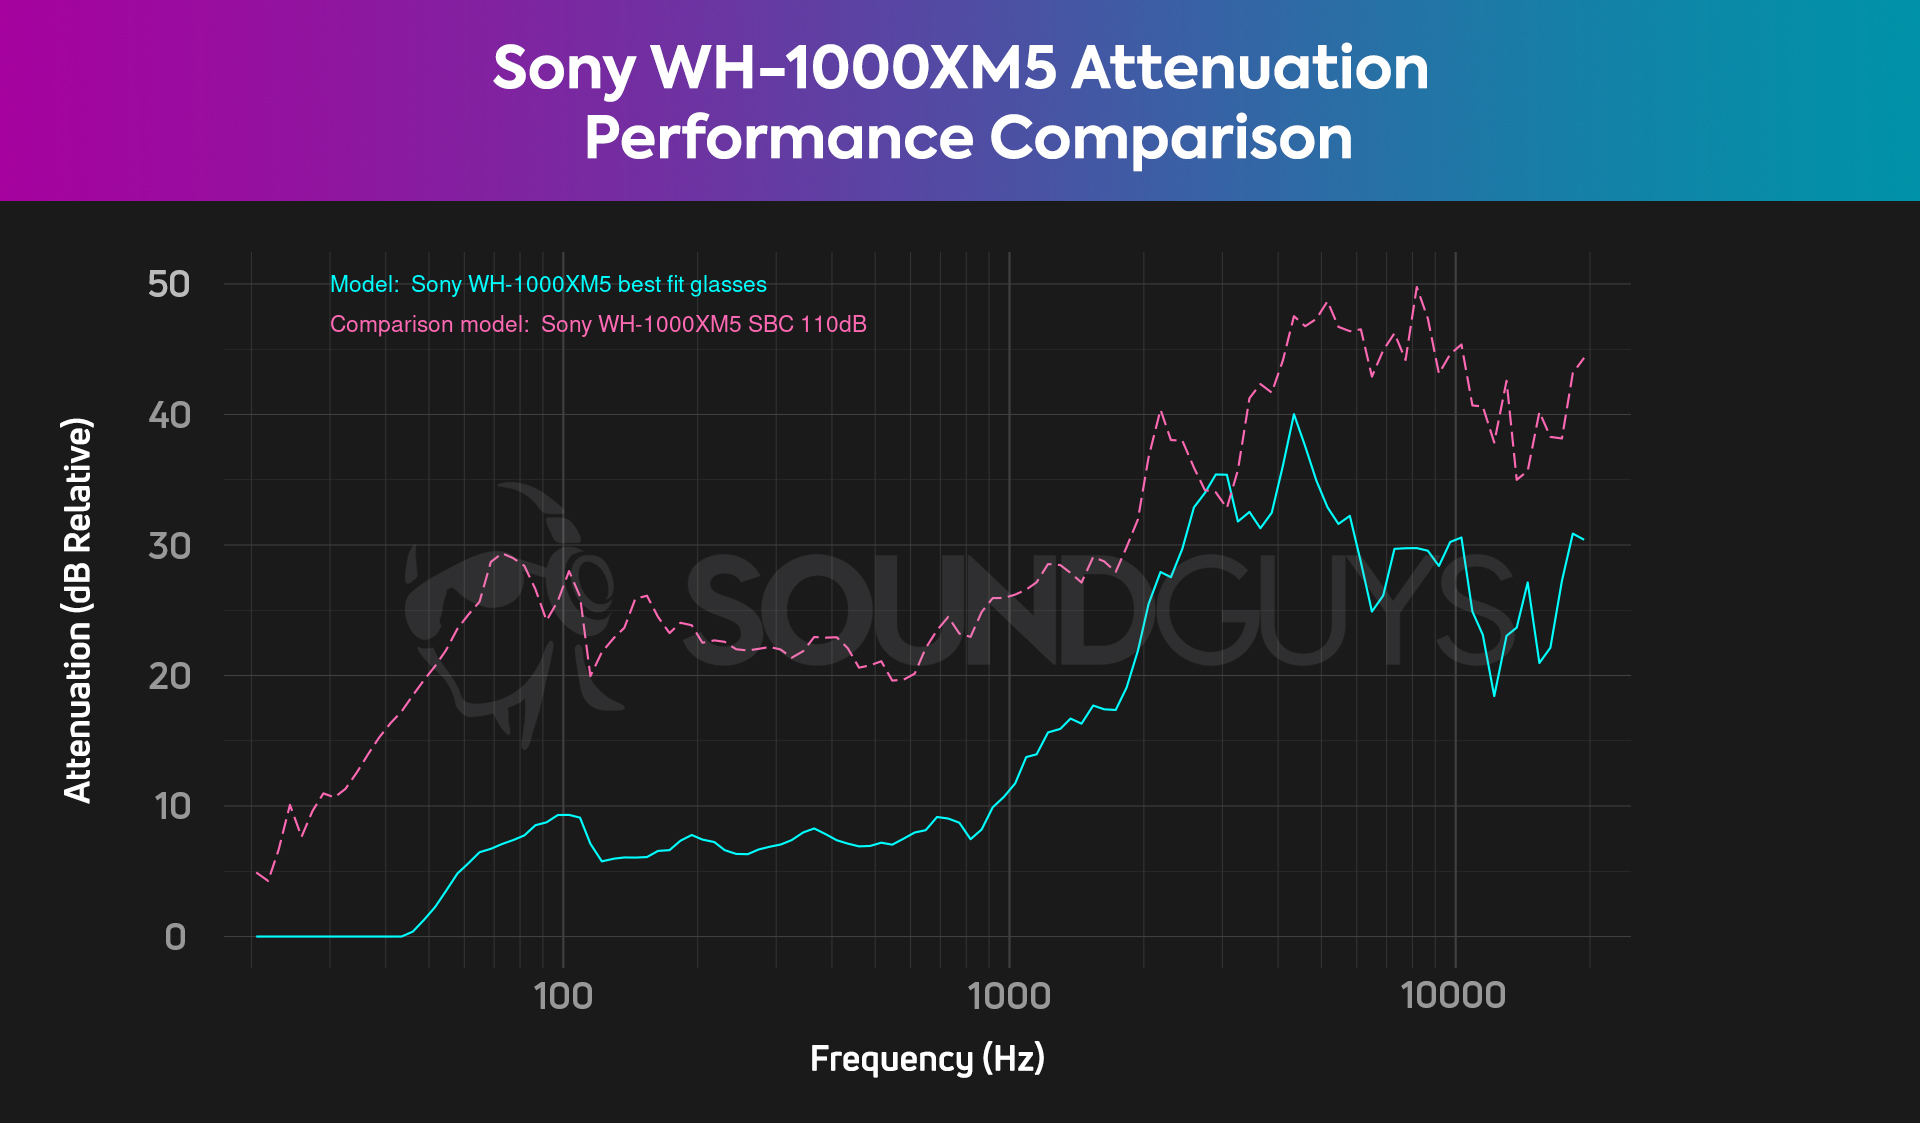 Sony WF-1000XM3 (3 stores) find prices • Compare today »